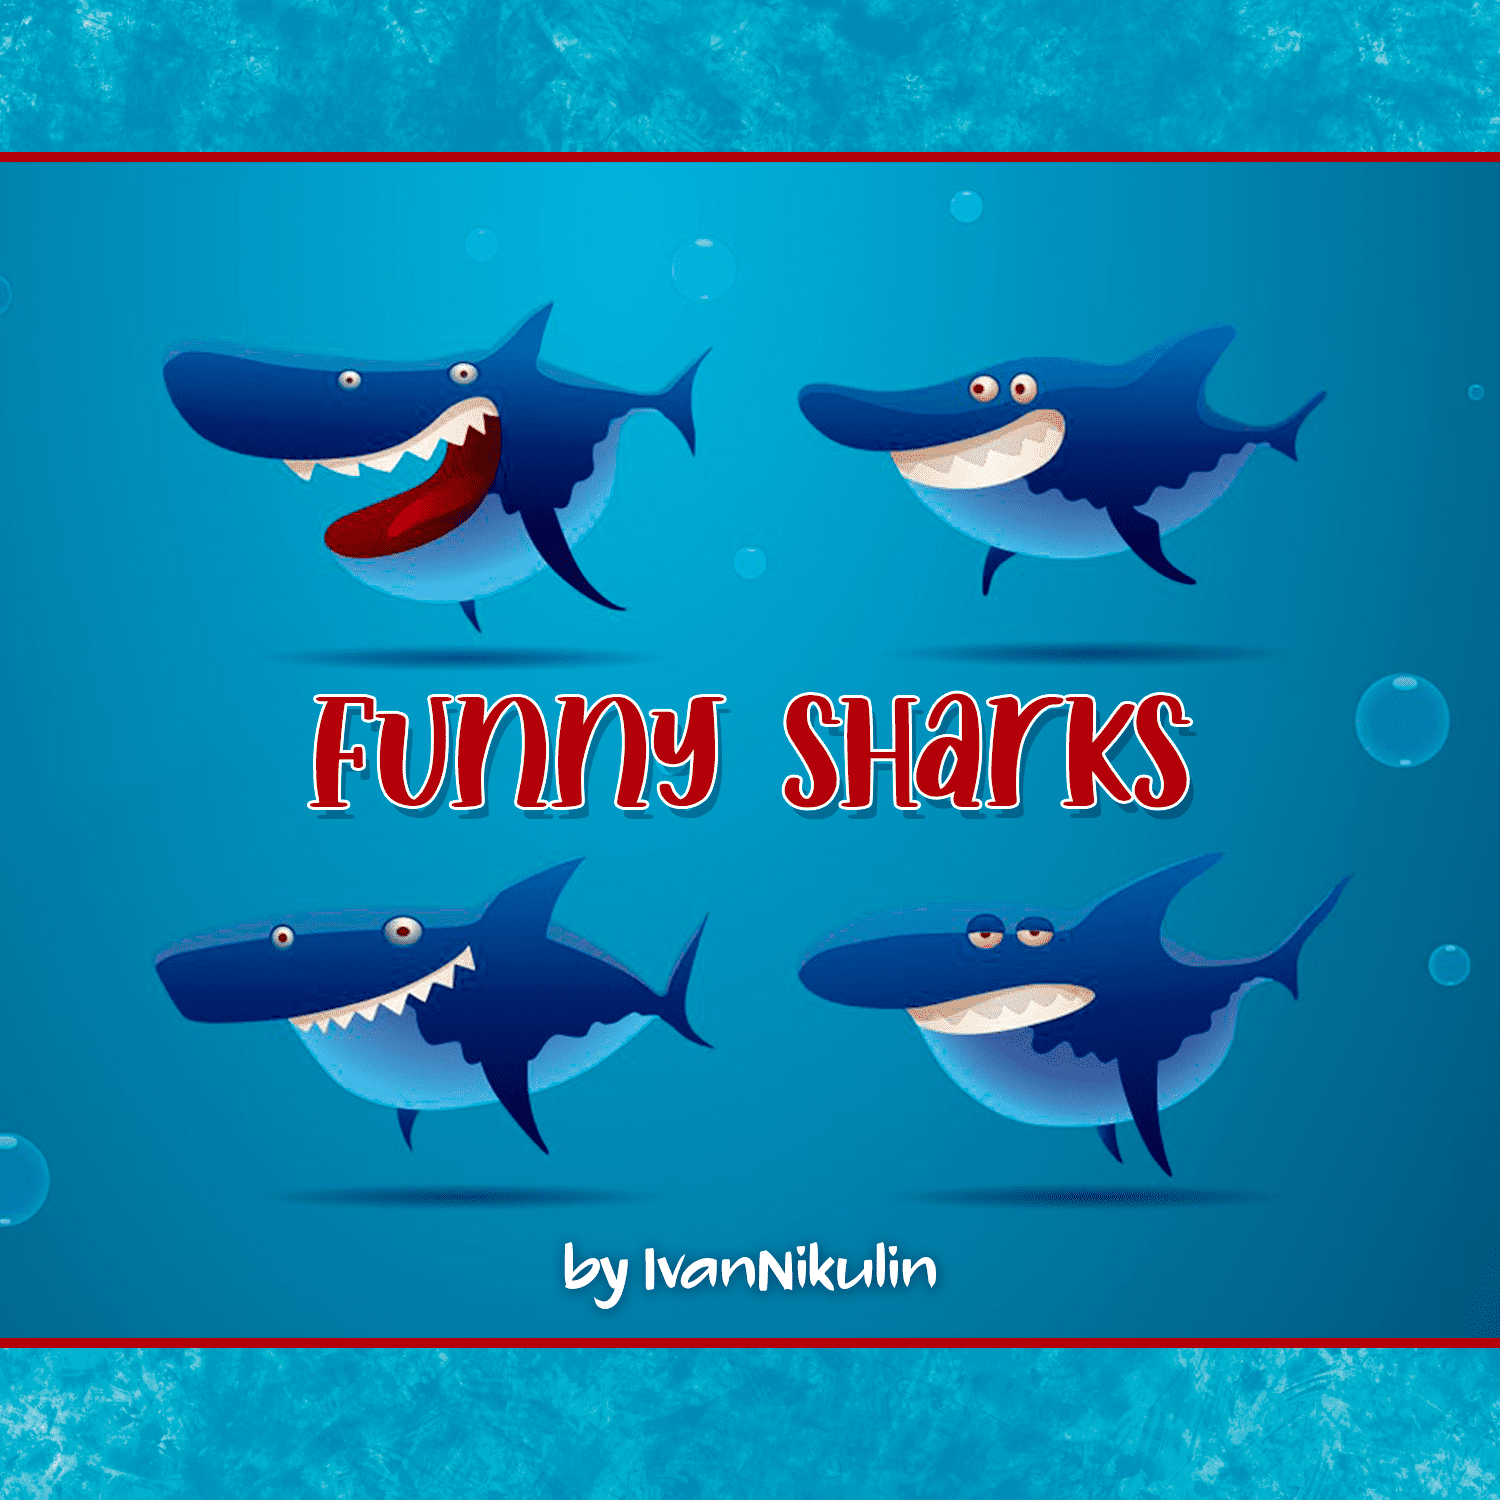 Funny sharks cover.